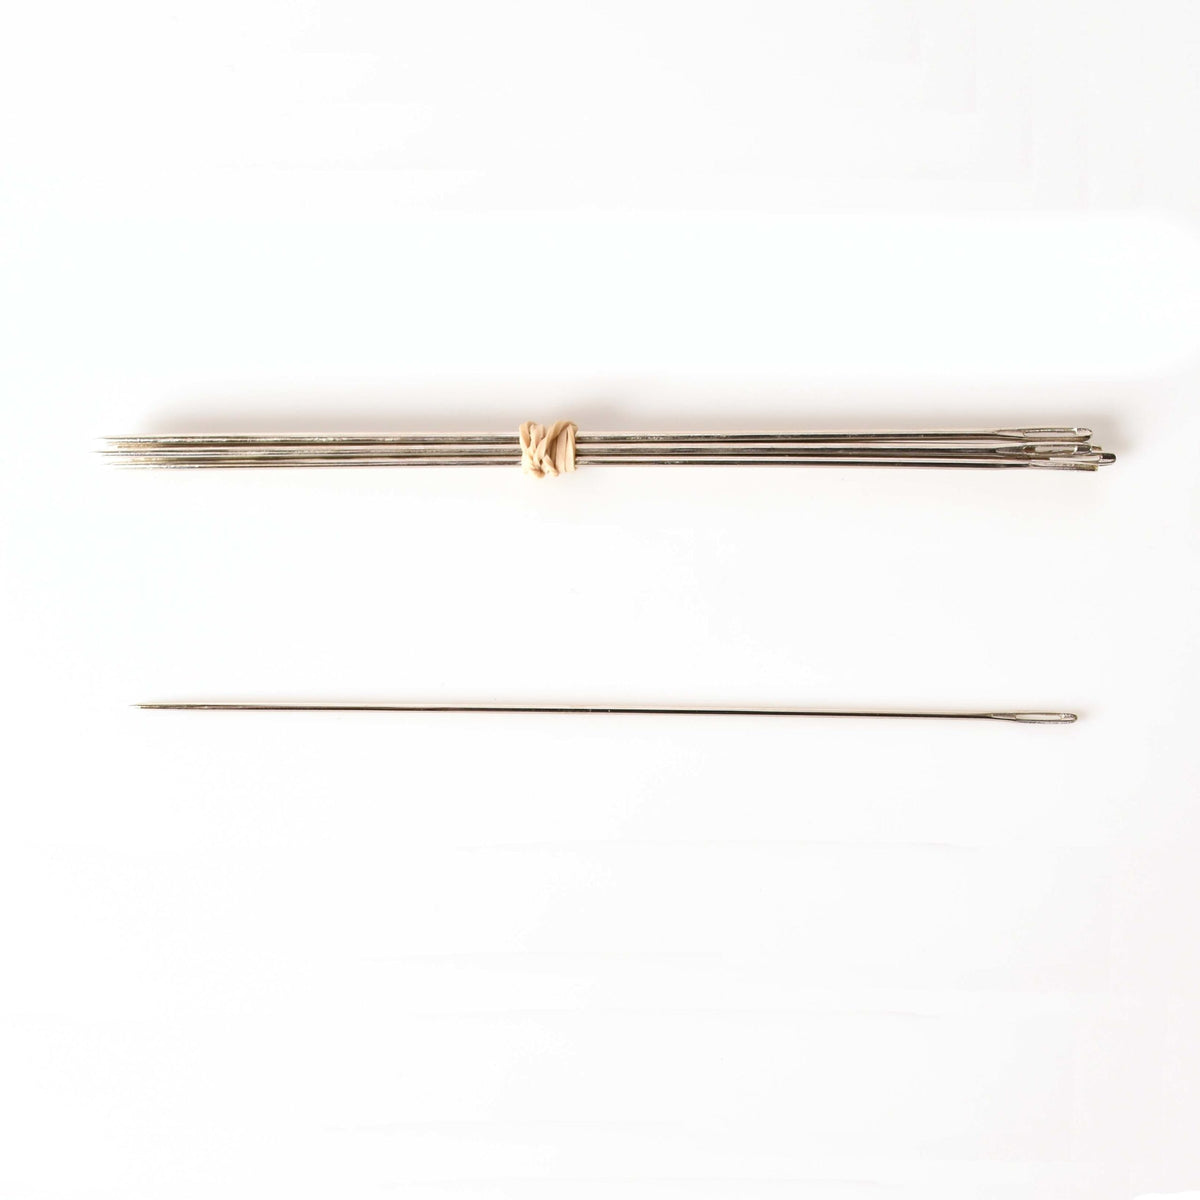 Shop Metal Weaving Needles for Schacht Zoom Loom Schacht. Today you can  browse the latest trends and brands online